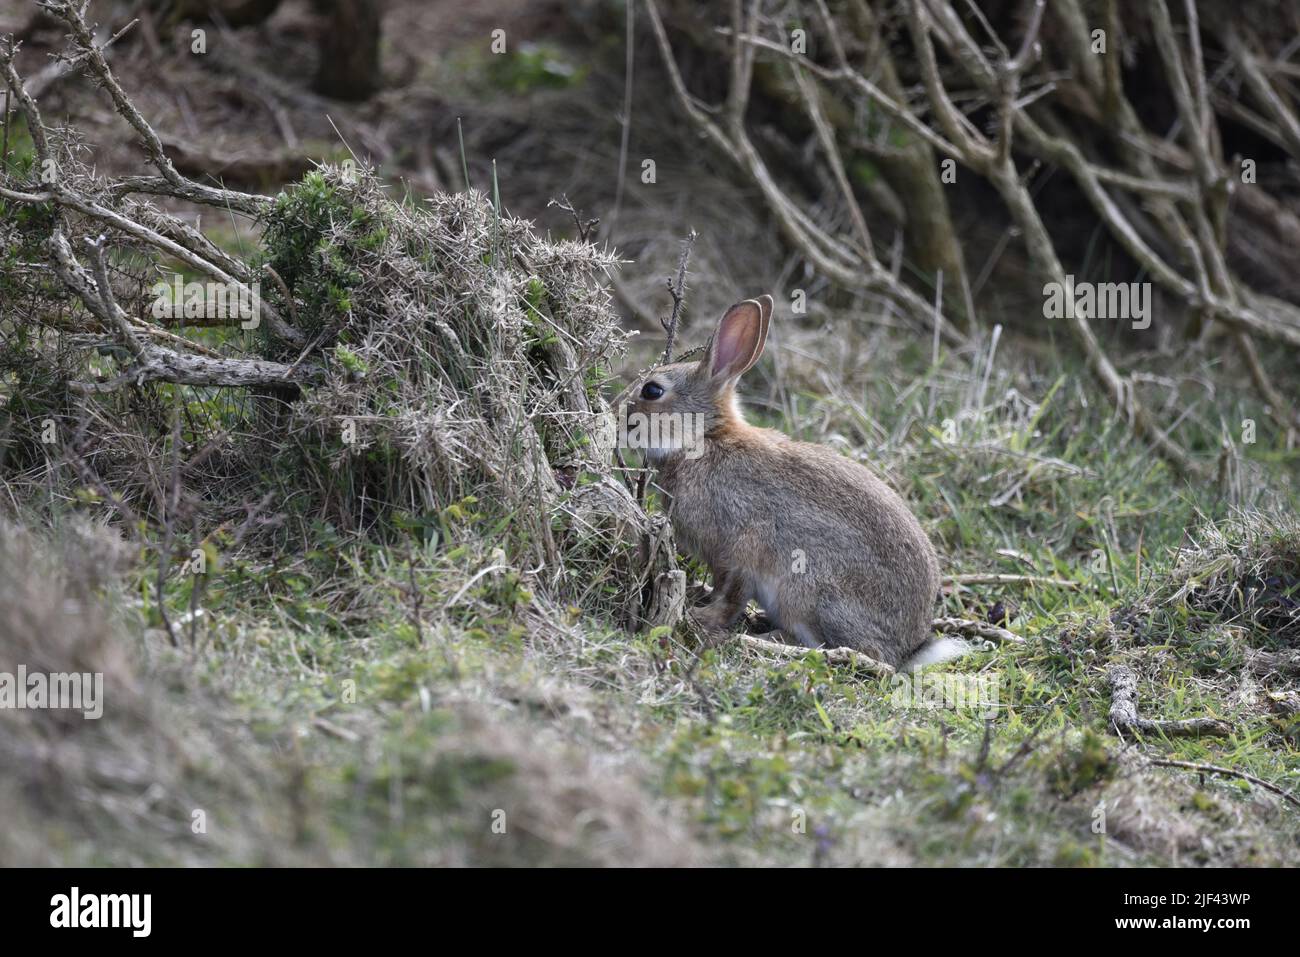 Middle Foreground Left-Profile Image of a Wild Rabbit Looking into  Hedge with Scrub Land Background on the Isle of Man Coast, UK in June Stock Photo